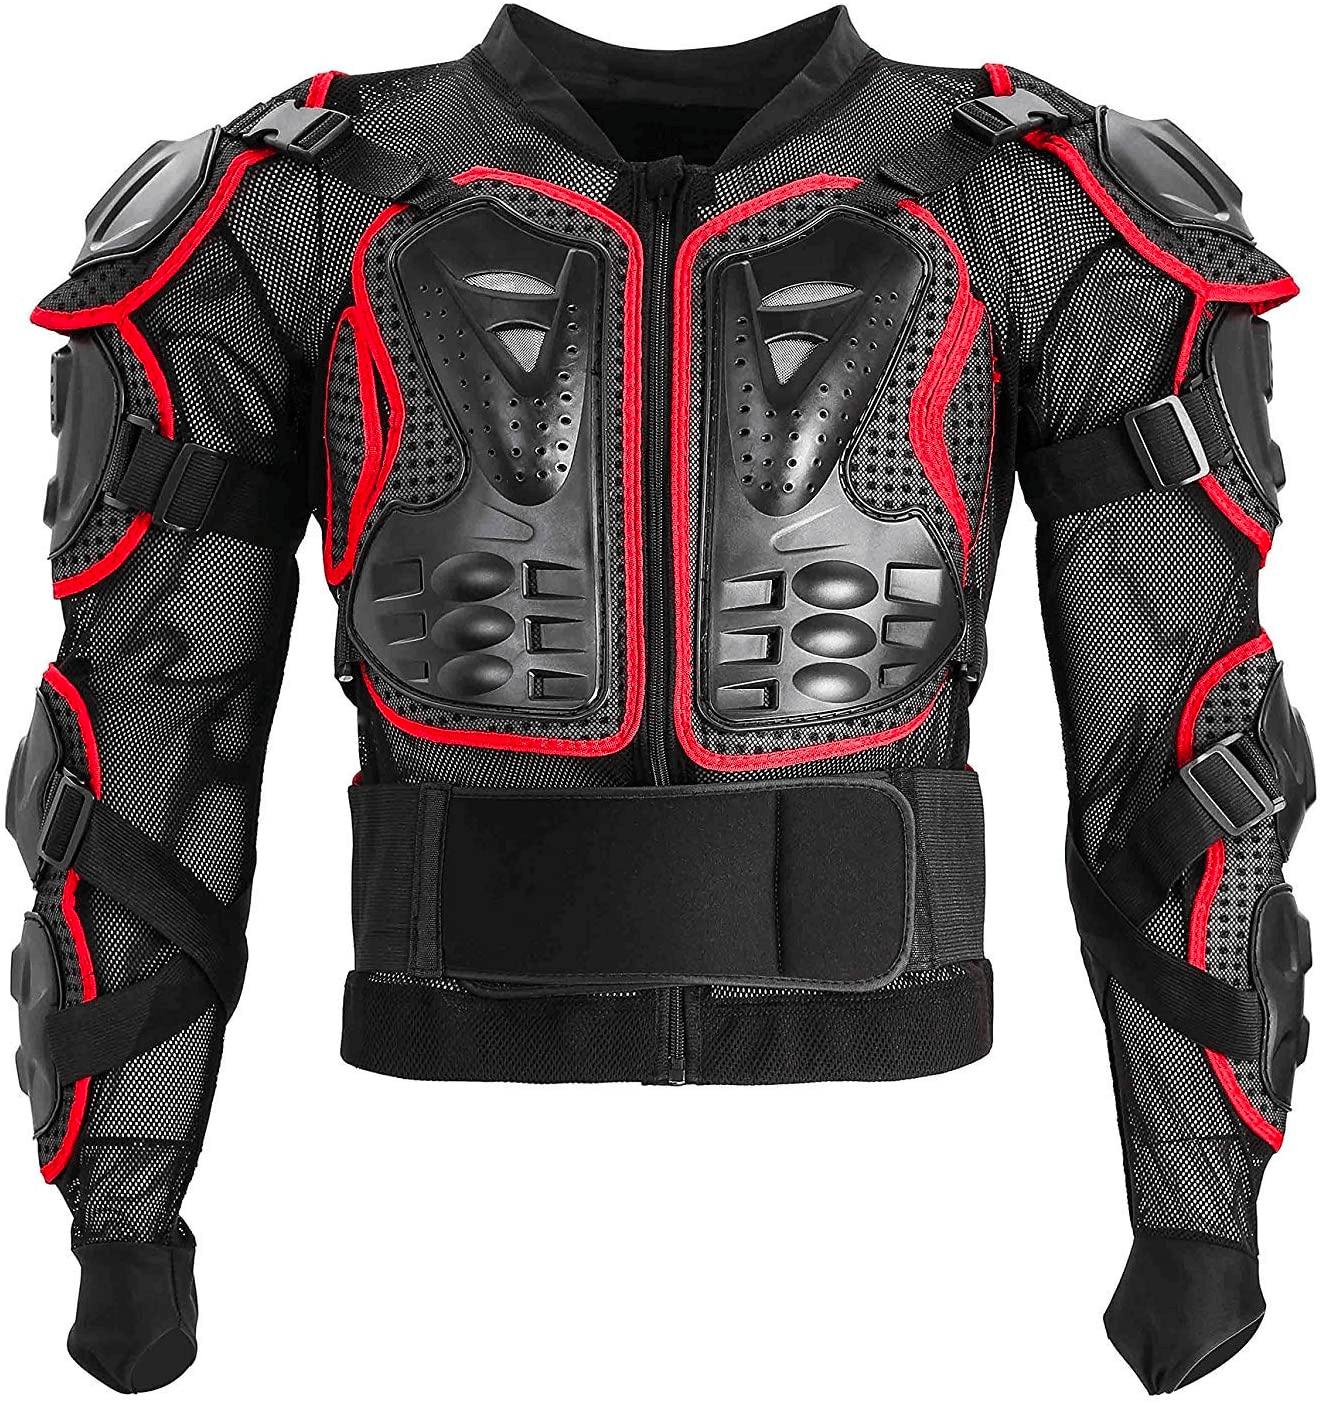 This mountain bike armor is one item that protects many different areas of the top part of your body.